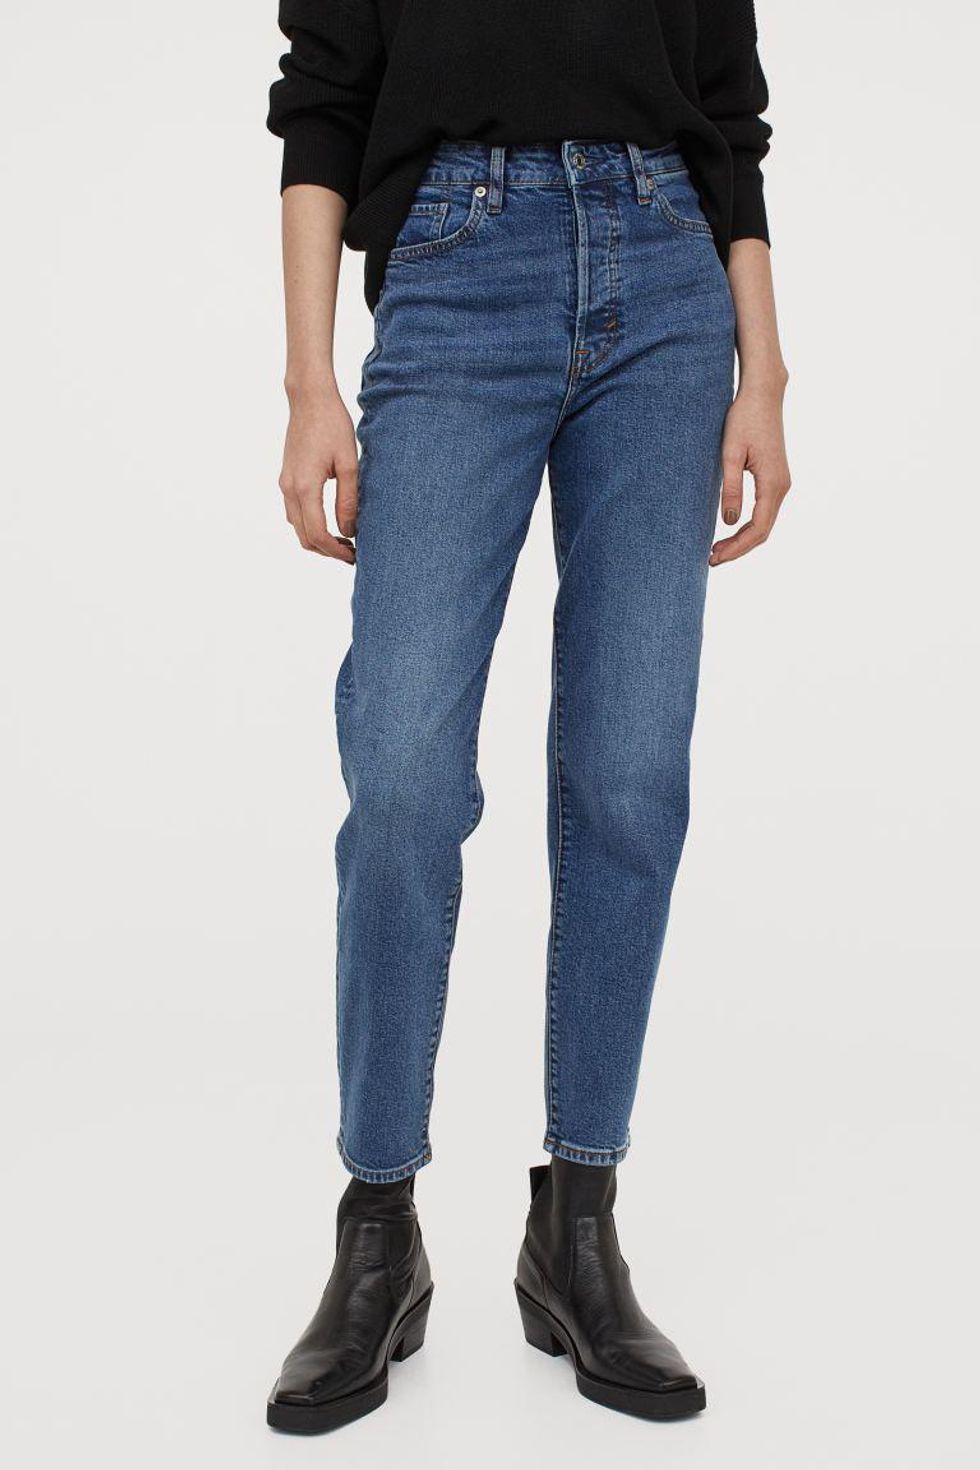 h & M mom high ankle jeans